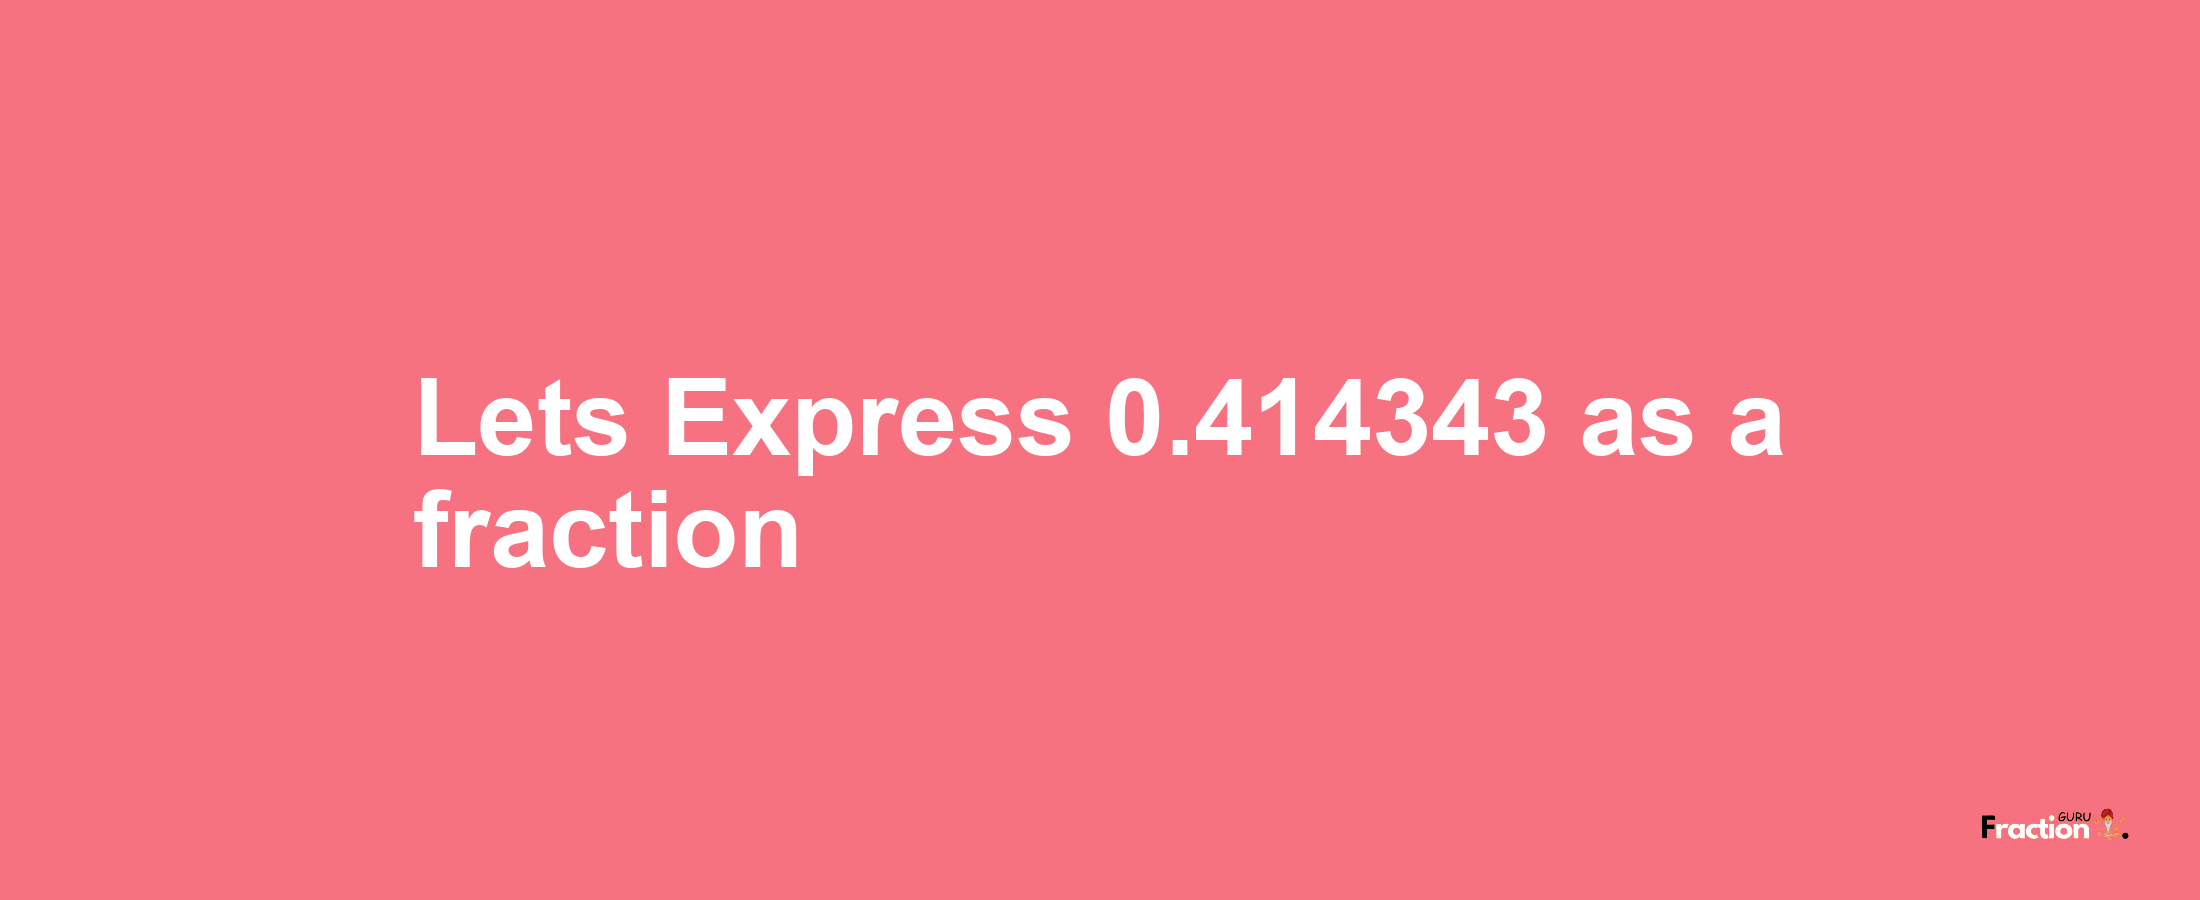 Lets Express 0.414343 as afraction